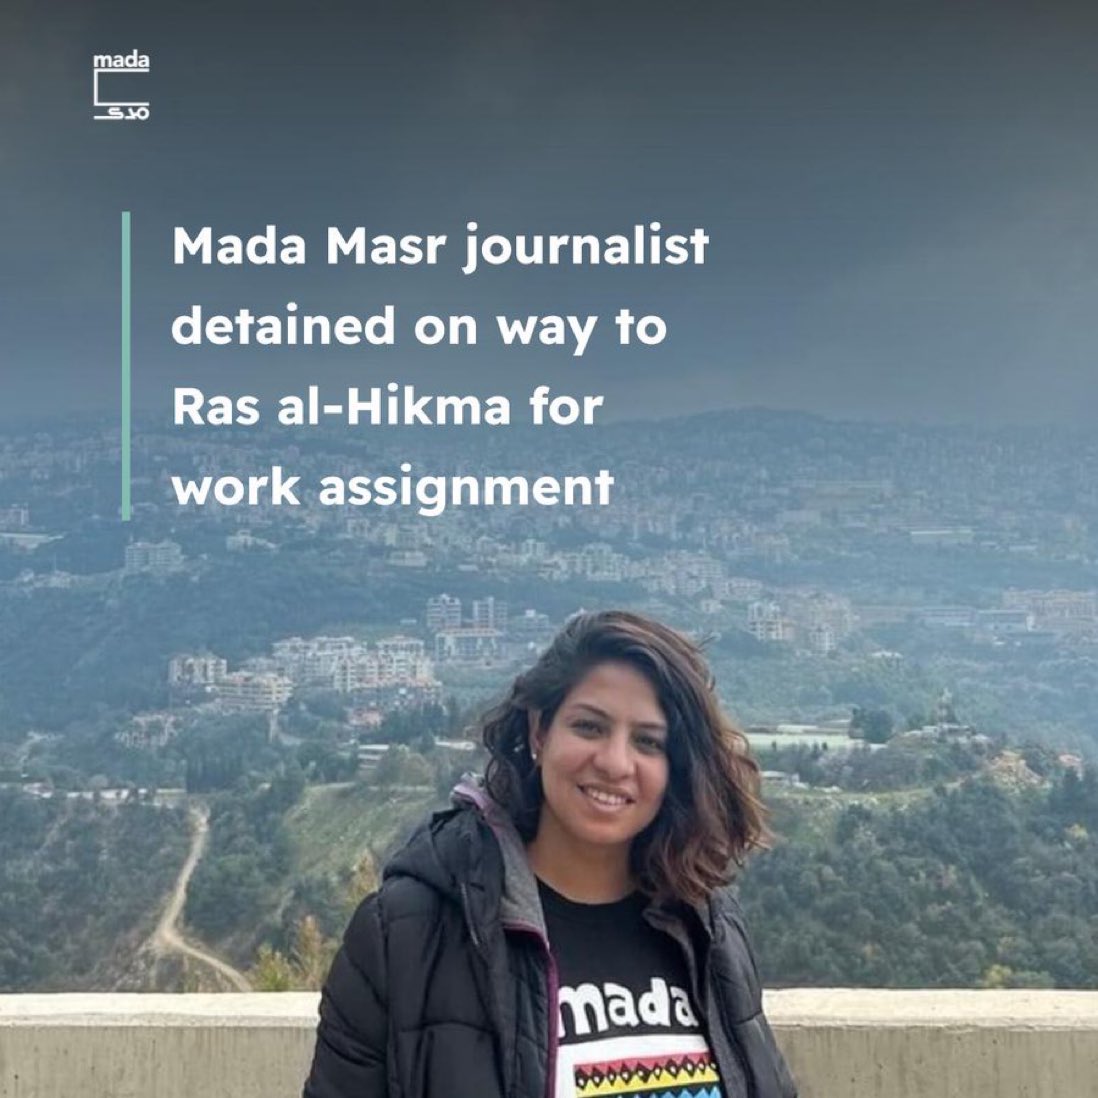 Rana Mamdouh, an investigative #journalist working for @MadaMasr #Egypt has bern detained on her way to Ras al-Hikma for work assignment.